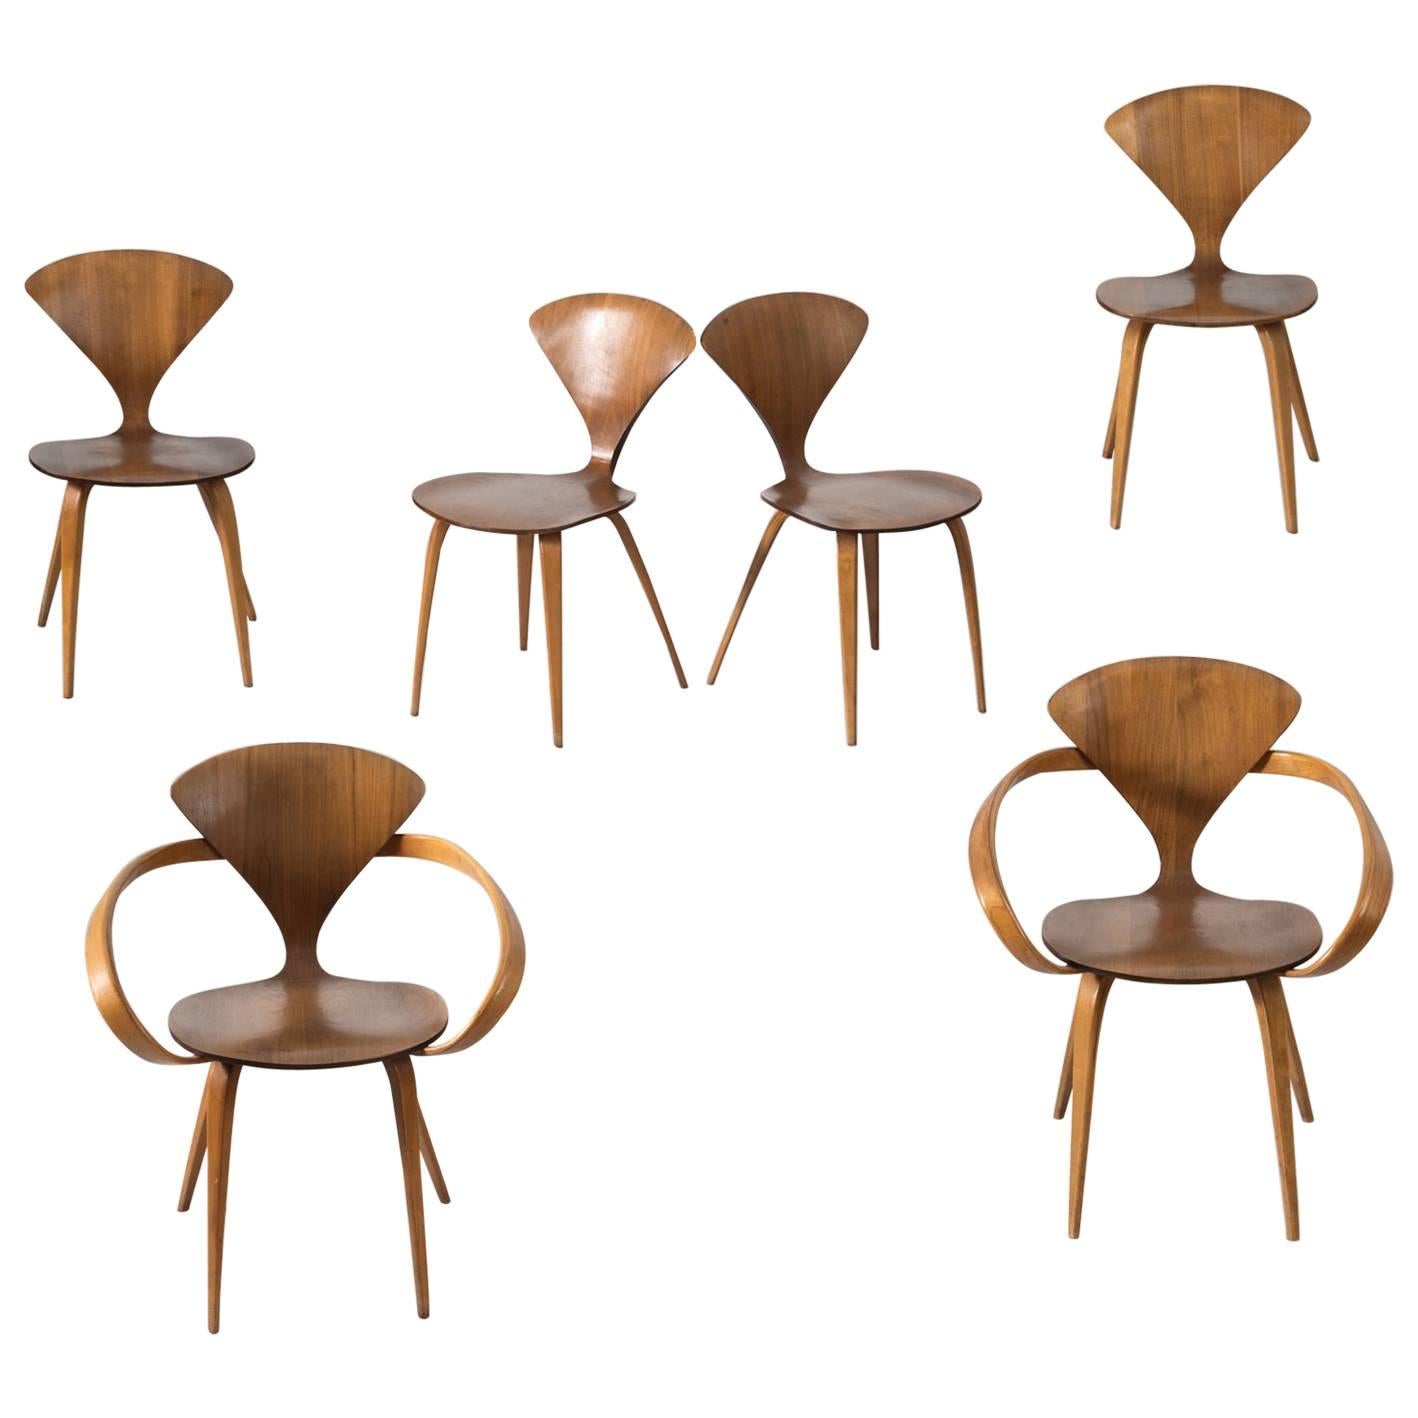 Norman Cherner Set of Six Dining Chairs in Walnut